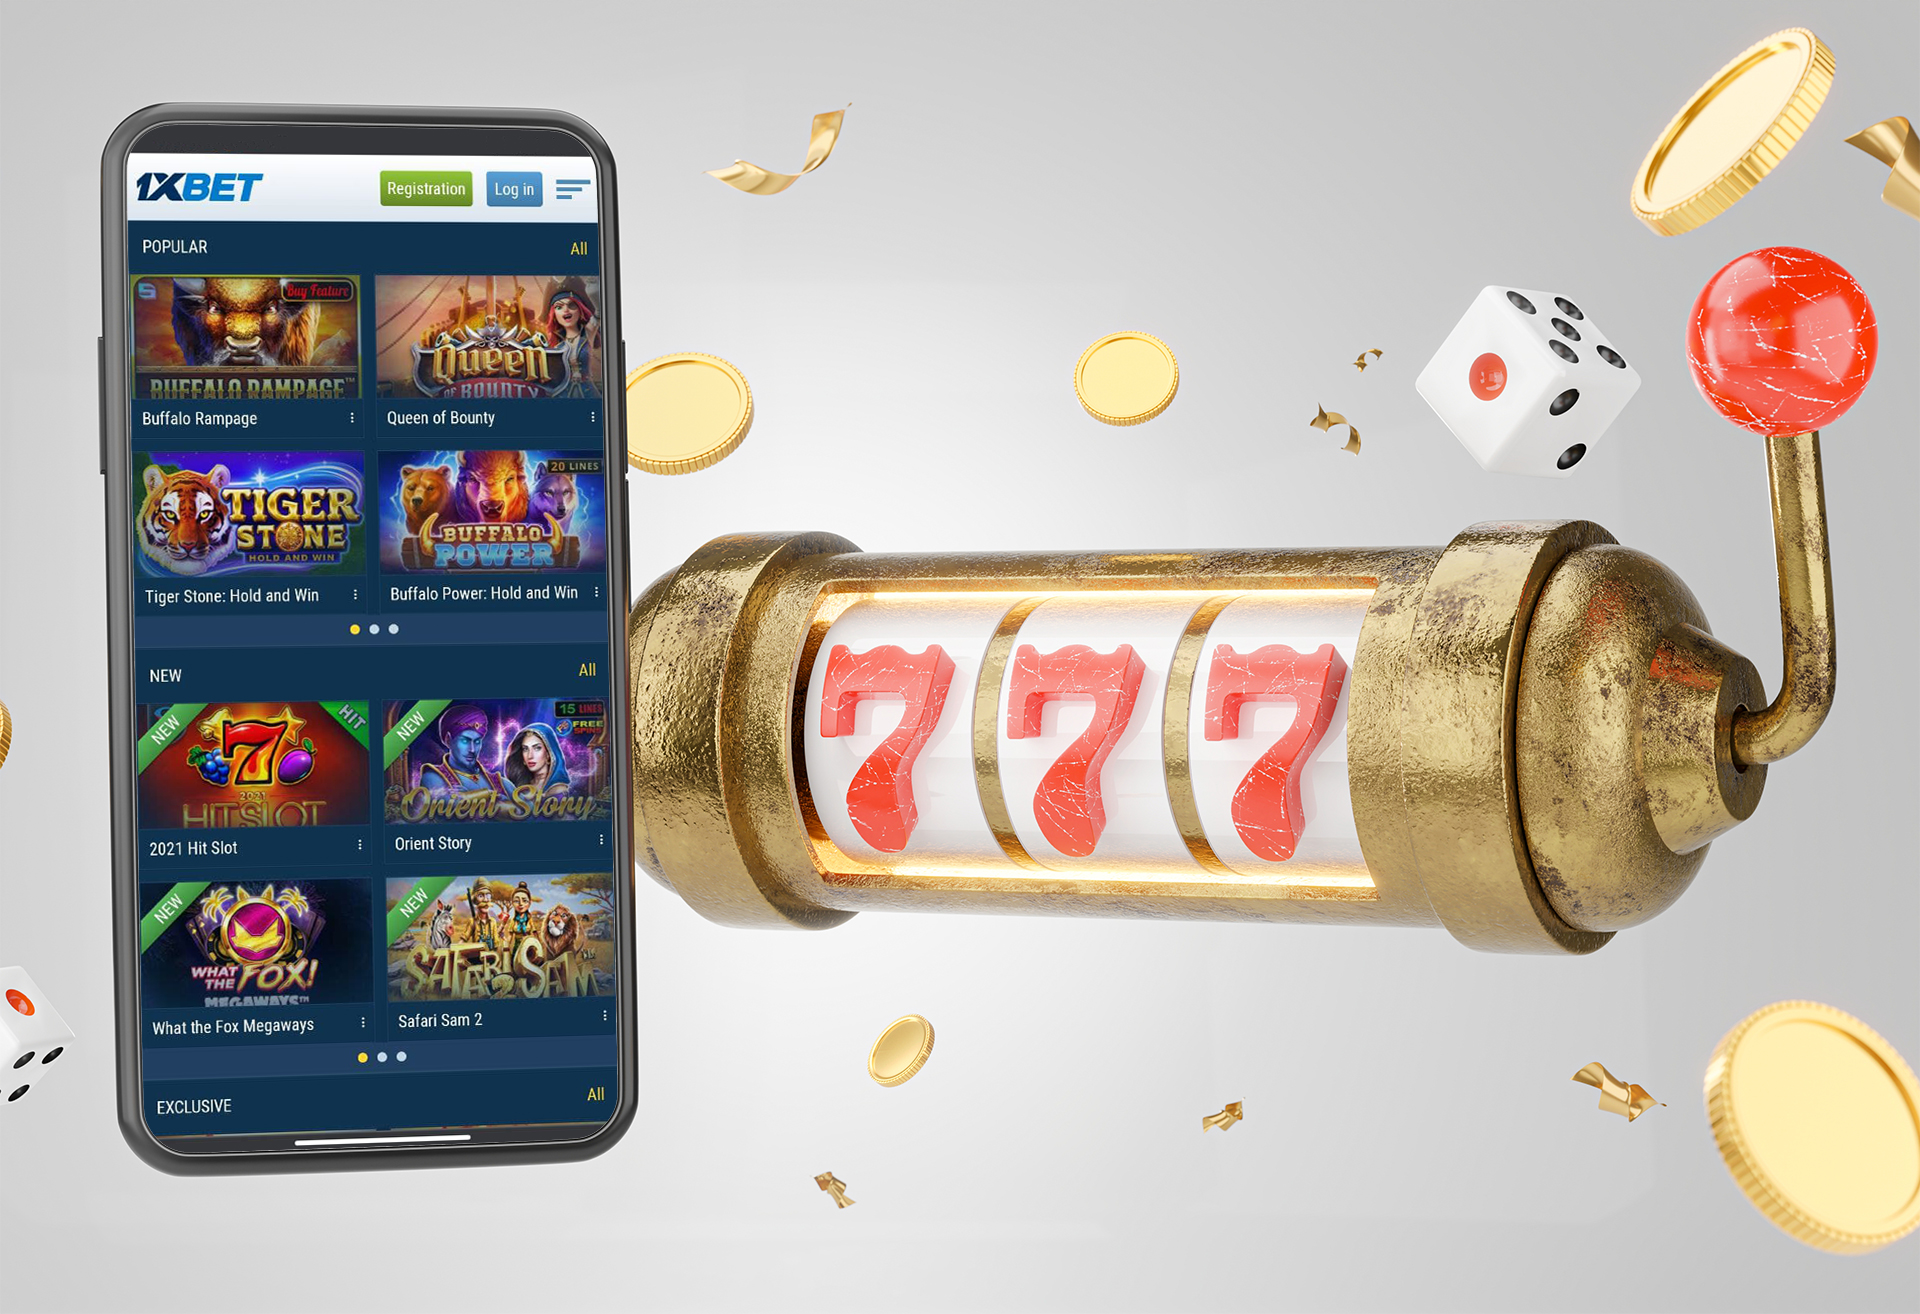 You can play all the 1xbet casino games in our app too.